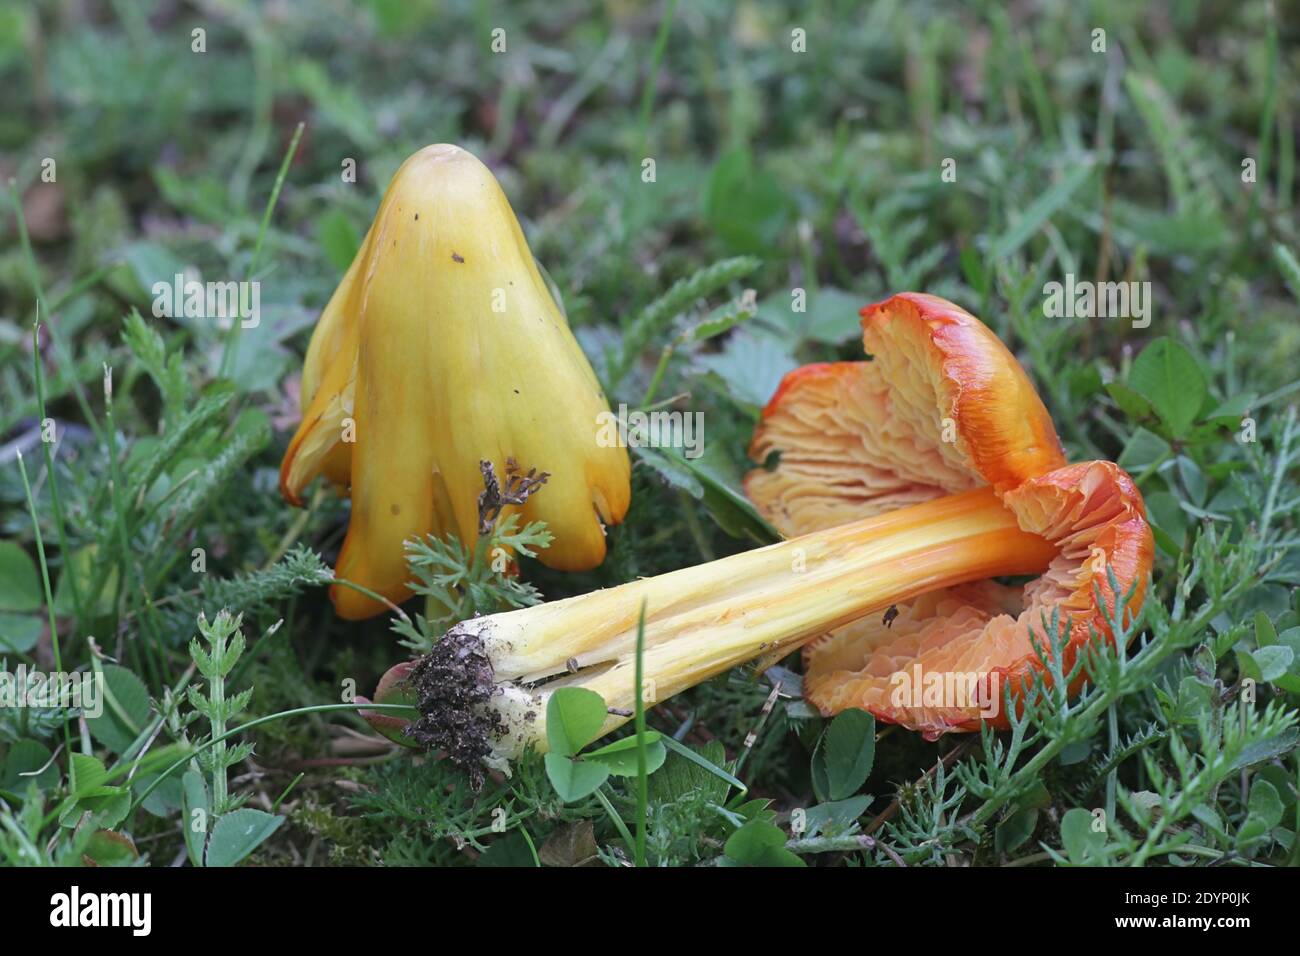 Hygrocybe acutoconica, also called Hygrocybe persistens, commonly known as Persistent Waxcap, wild mushroom from Finland Stock Photo